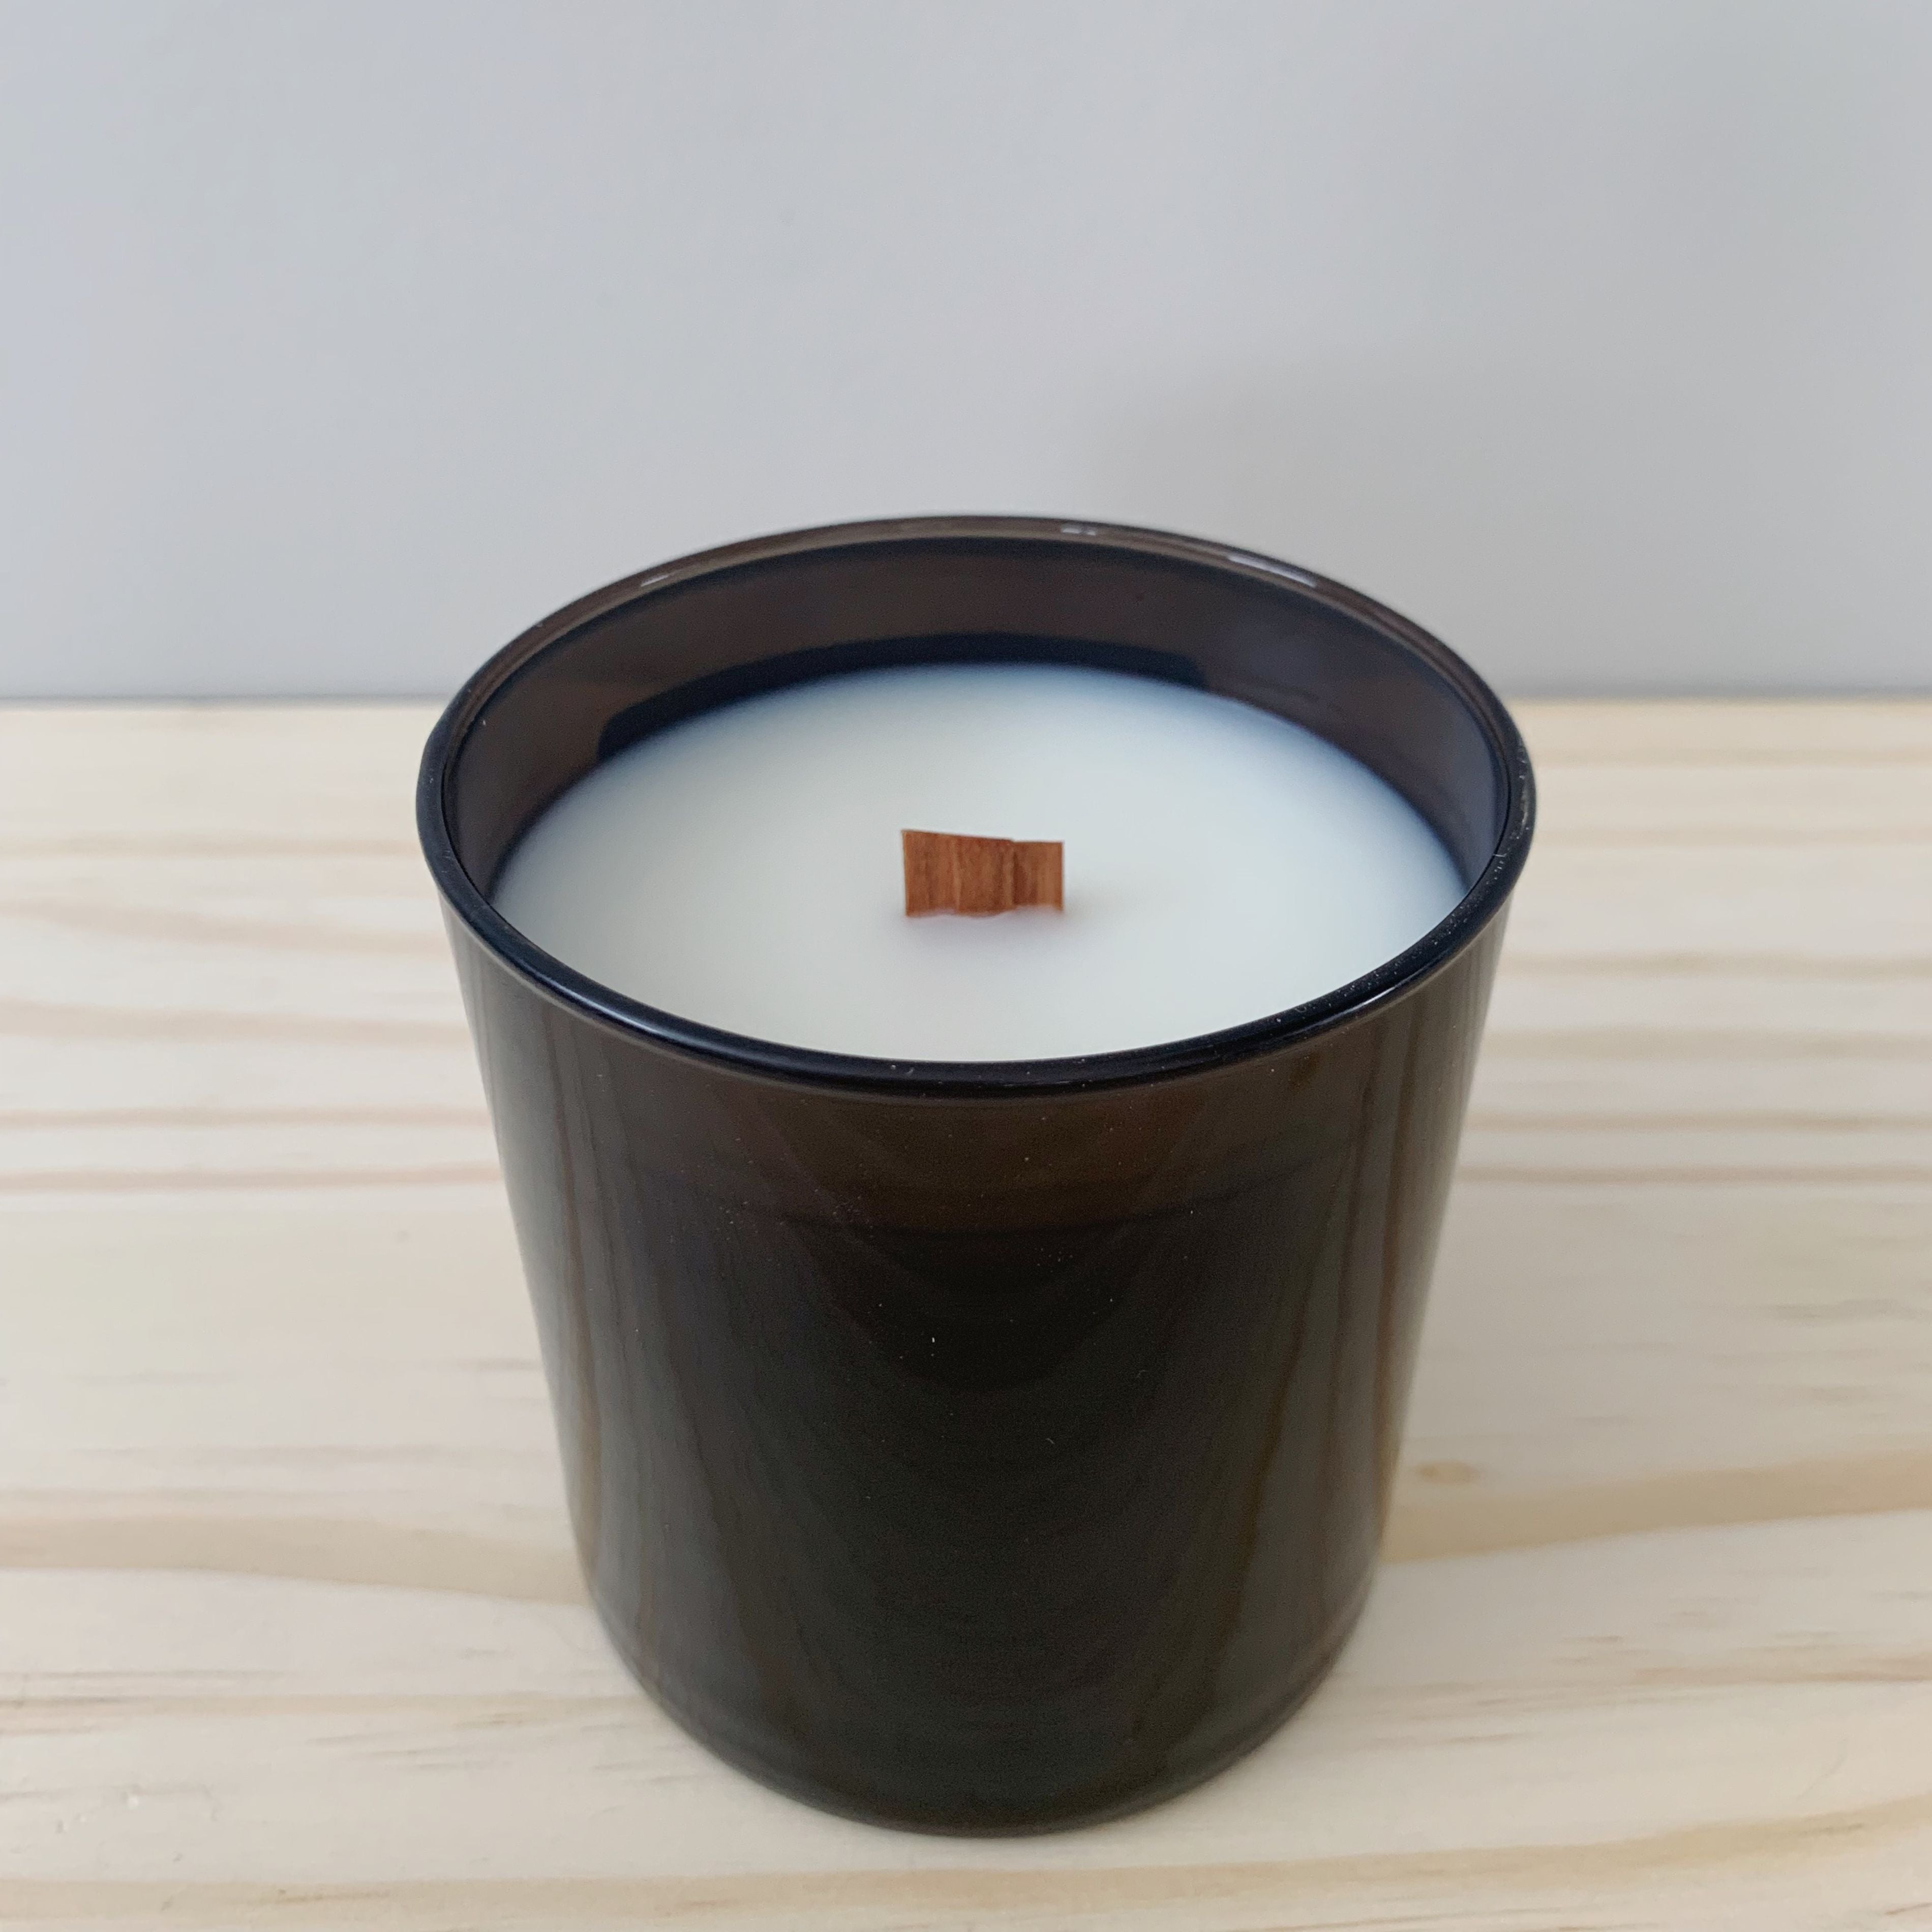 One black candle jar is sitting on top of a wood table with a neutral colored background. The candle has no lid or label. The wood wick is visible.